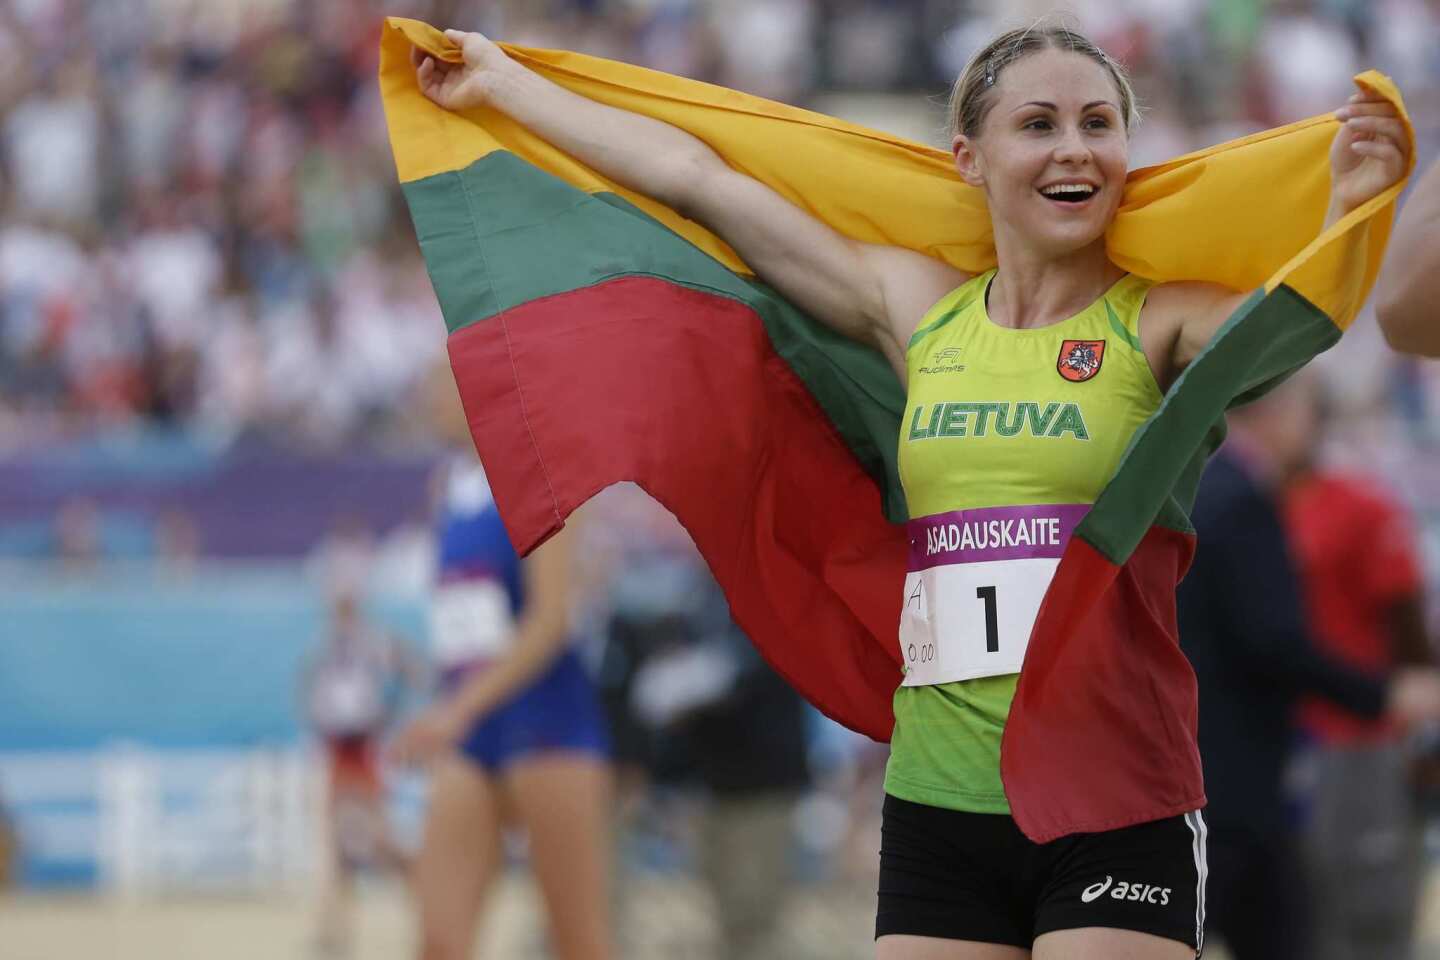 Laura Asadauskaite of Lithuania celebrates with her national flag after she won the gold medal in the women's modern pentathlon.